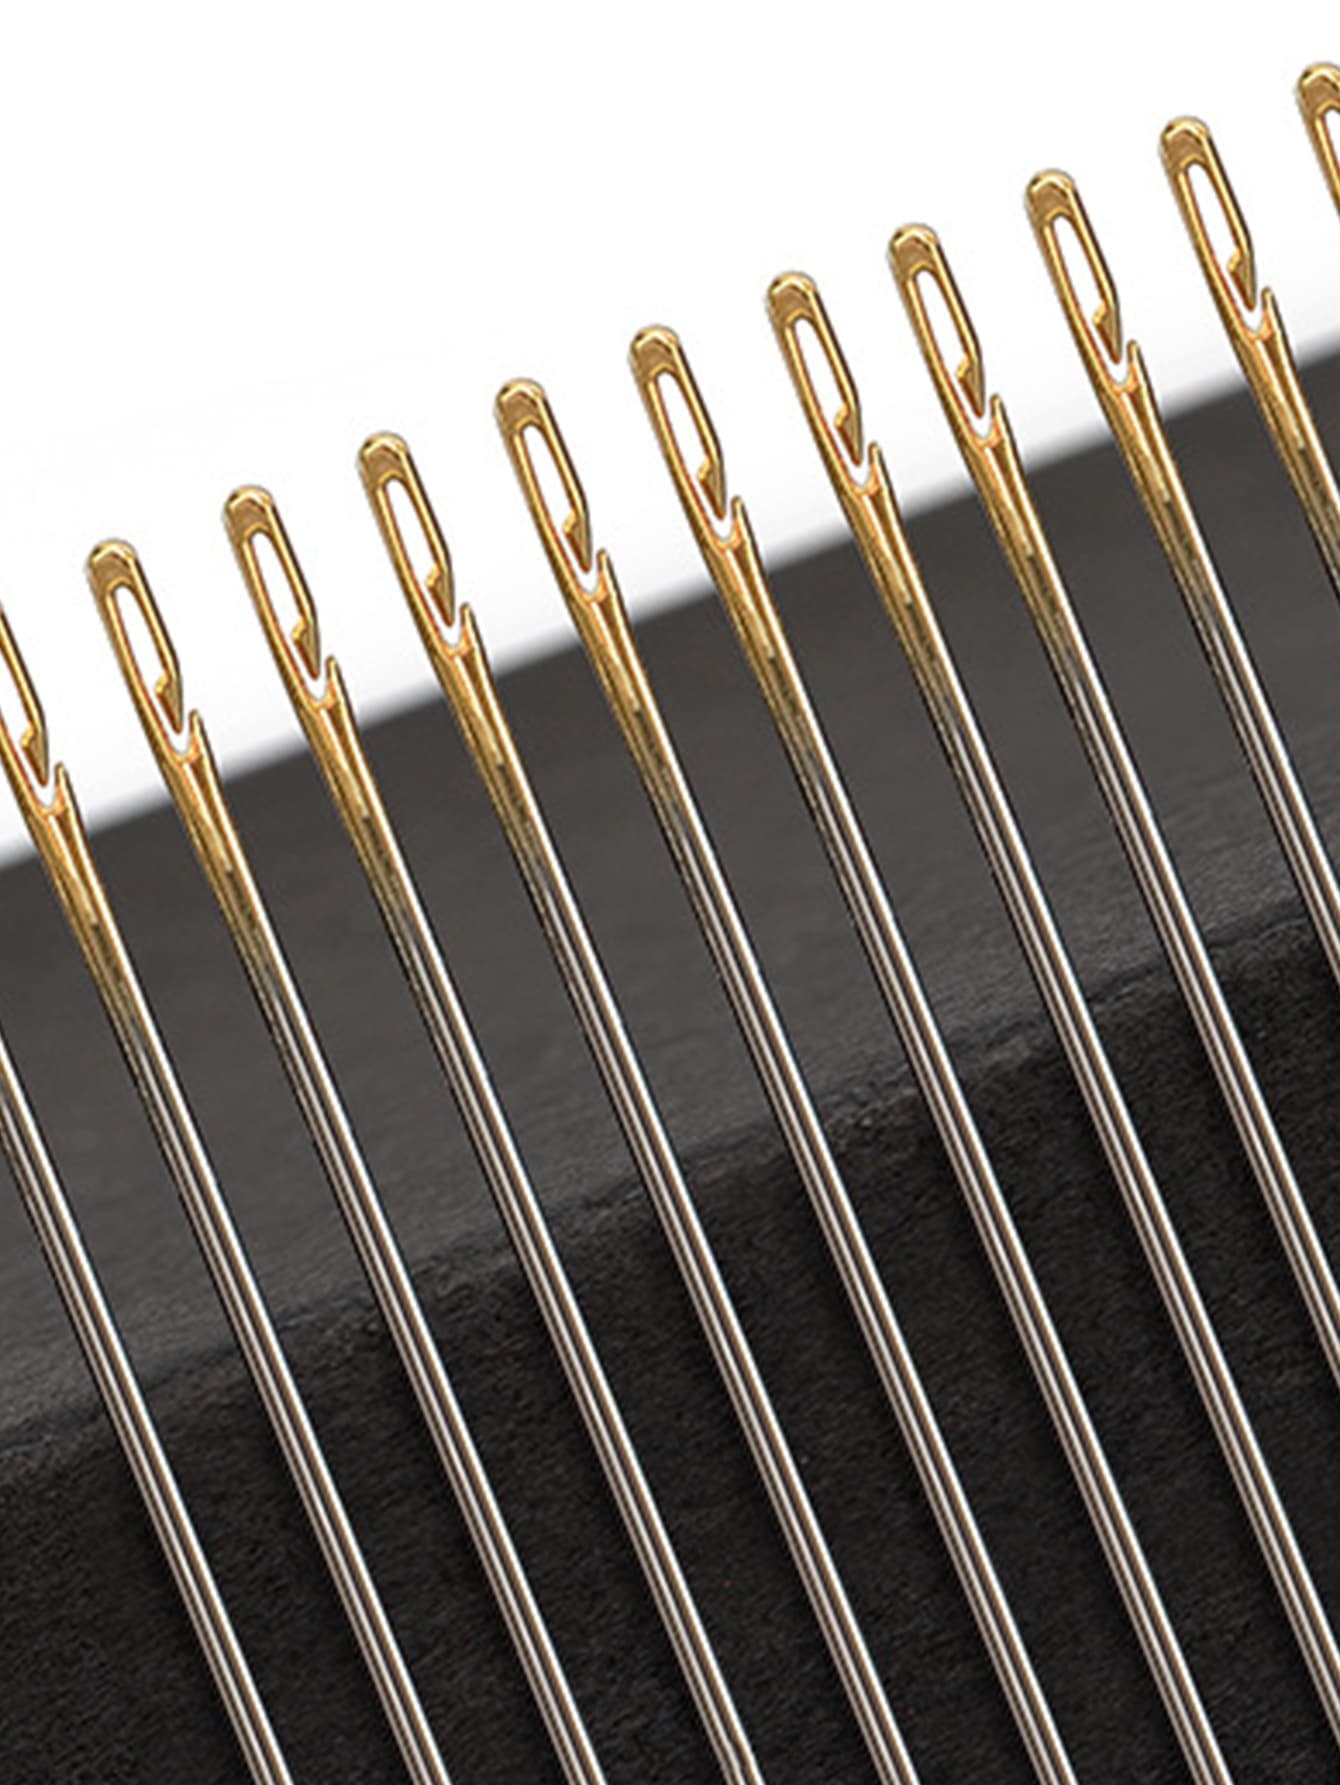 12pcs 45mm Self Threading Needle, Embroidery Needles For Hand Sewing, Easy Side Threading, Stainless Steel Stitching Tools